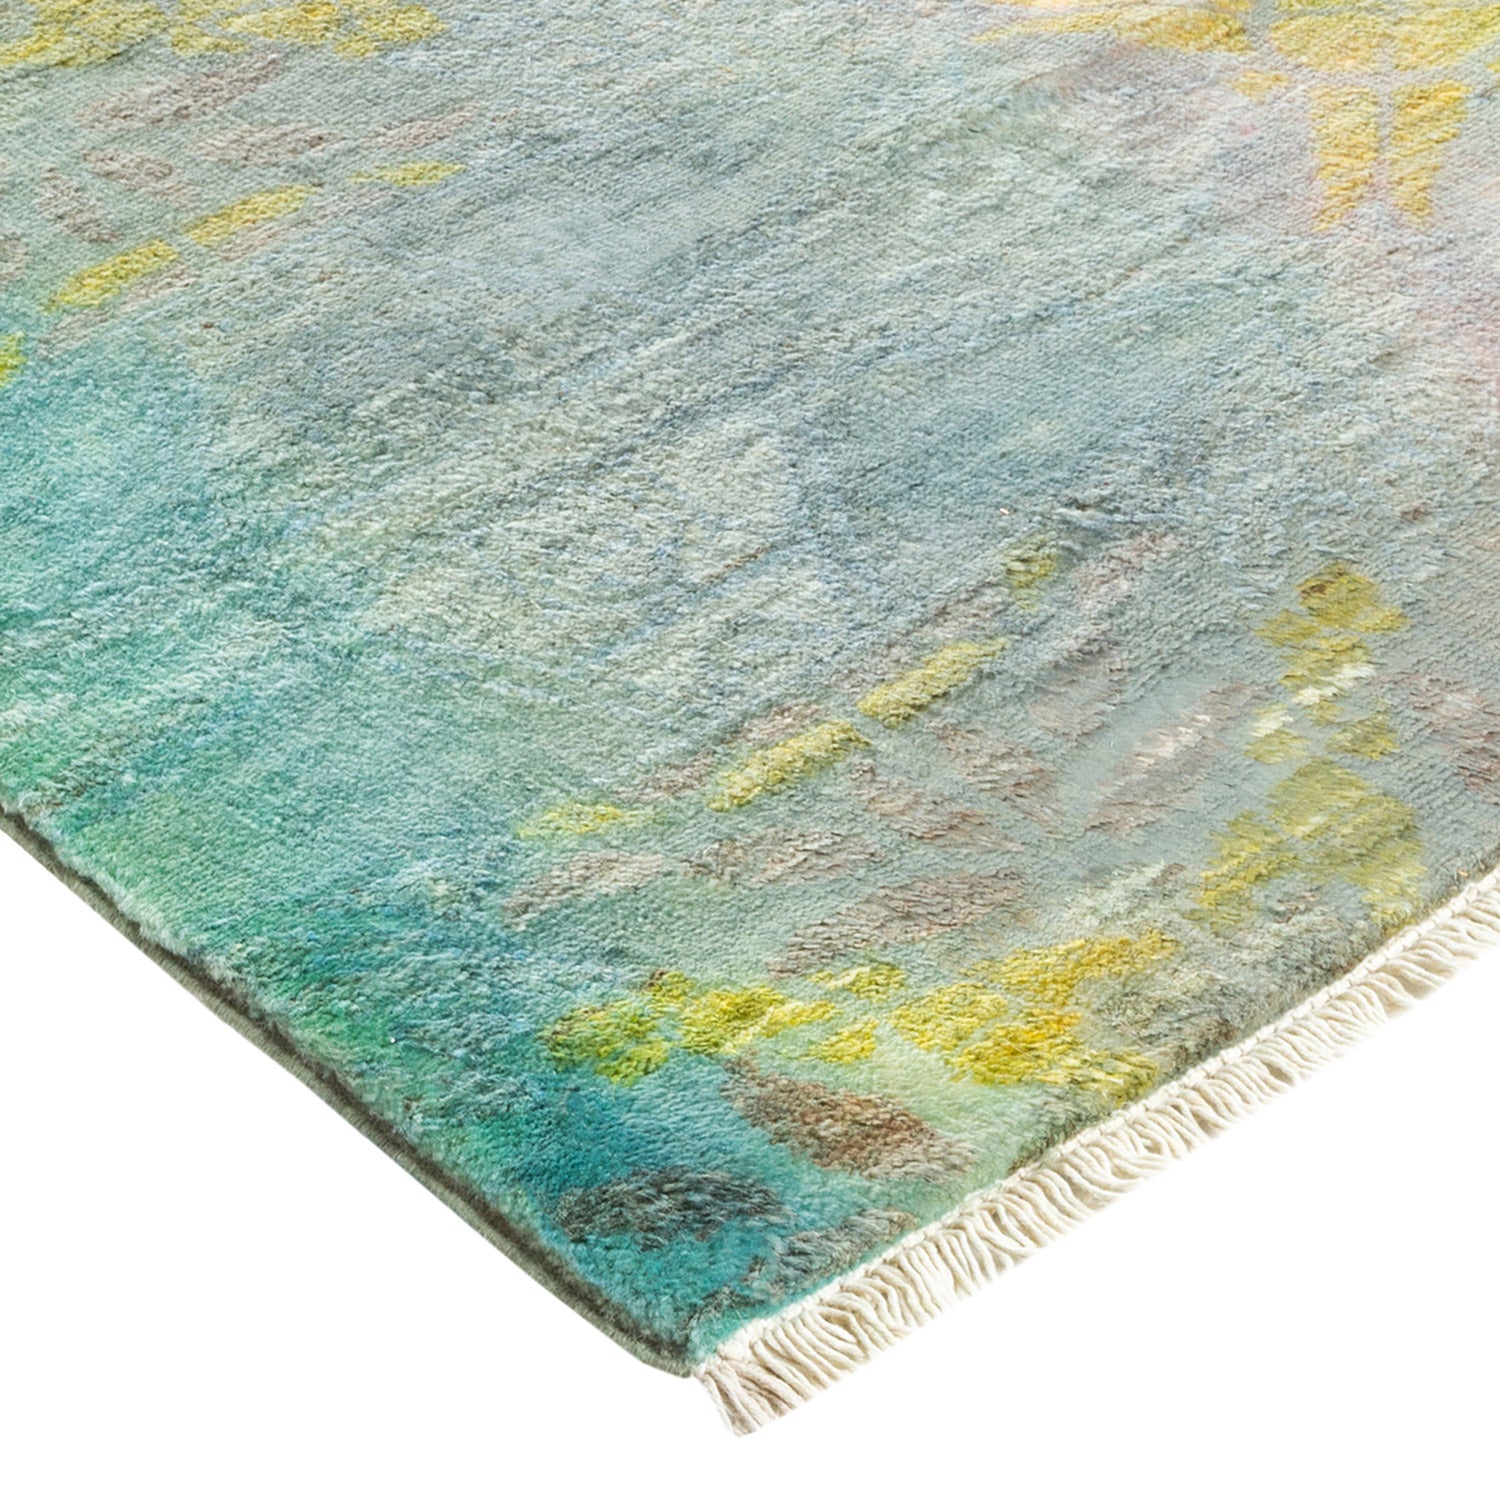 Vibrant, abstract rug with plush texture and colorful watercolor-like pattern.